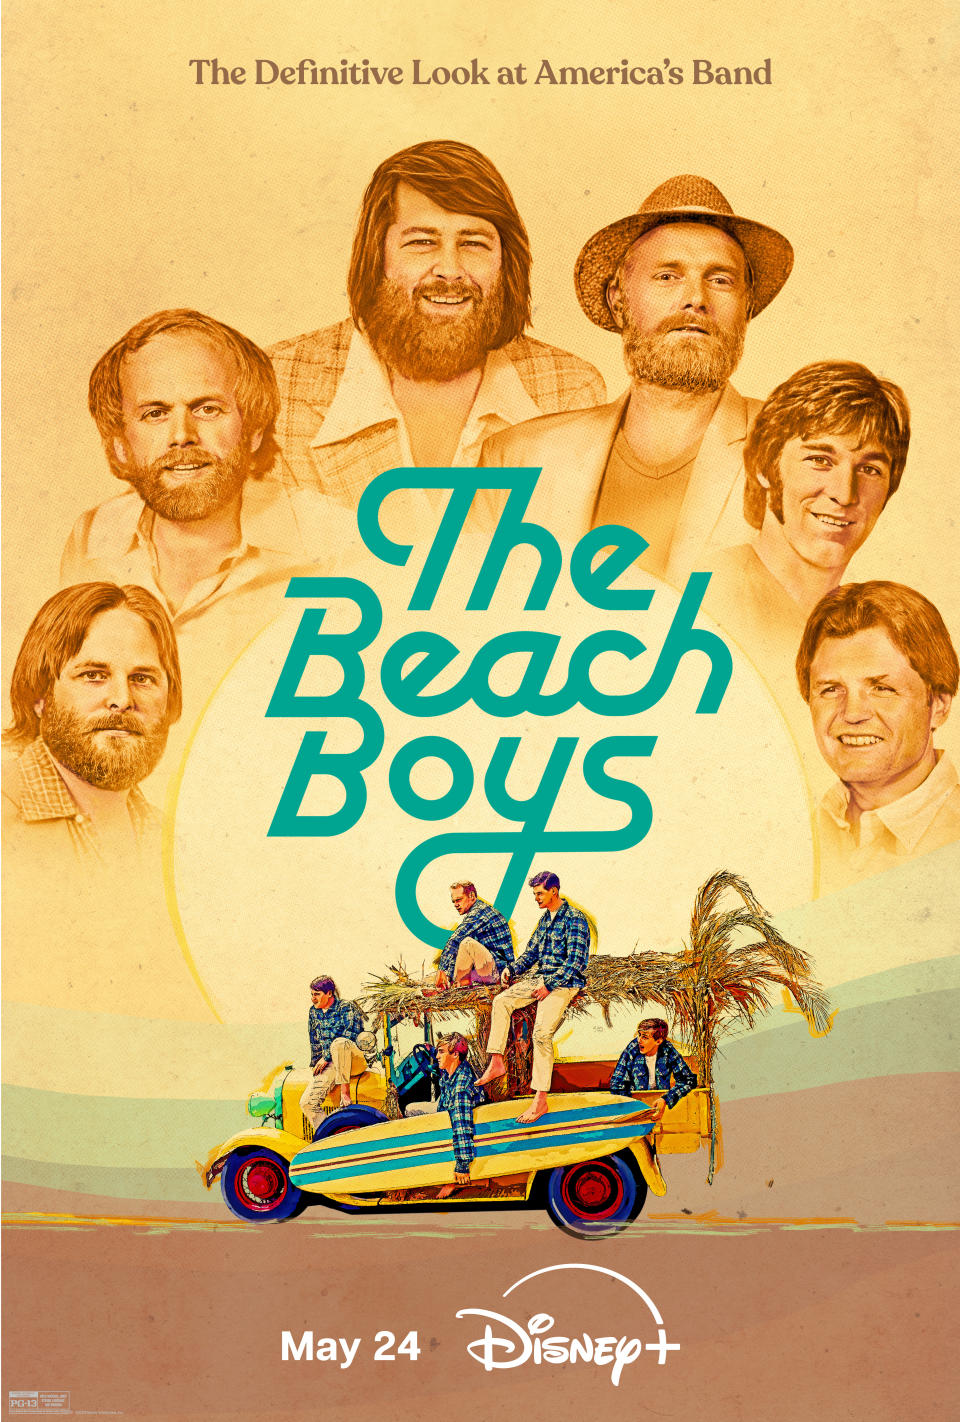 The Beach Boys, amid a surfing environment with dune buggies, in a graphic for the new documentary about them.  The words at the top read: The Definitive Look at America's Band.